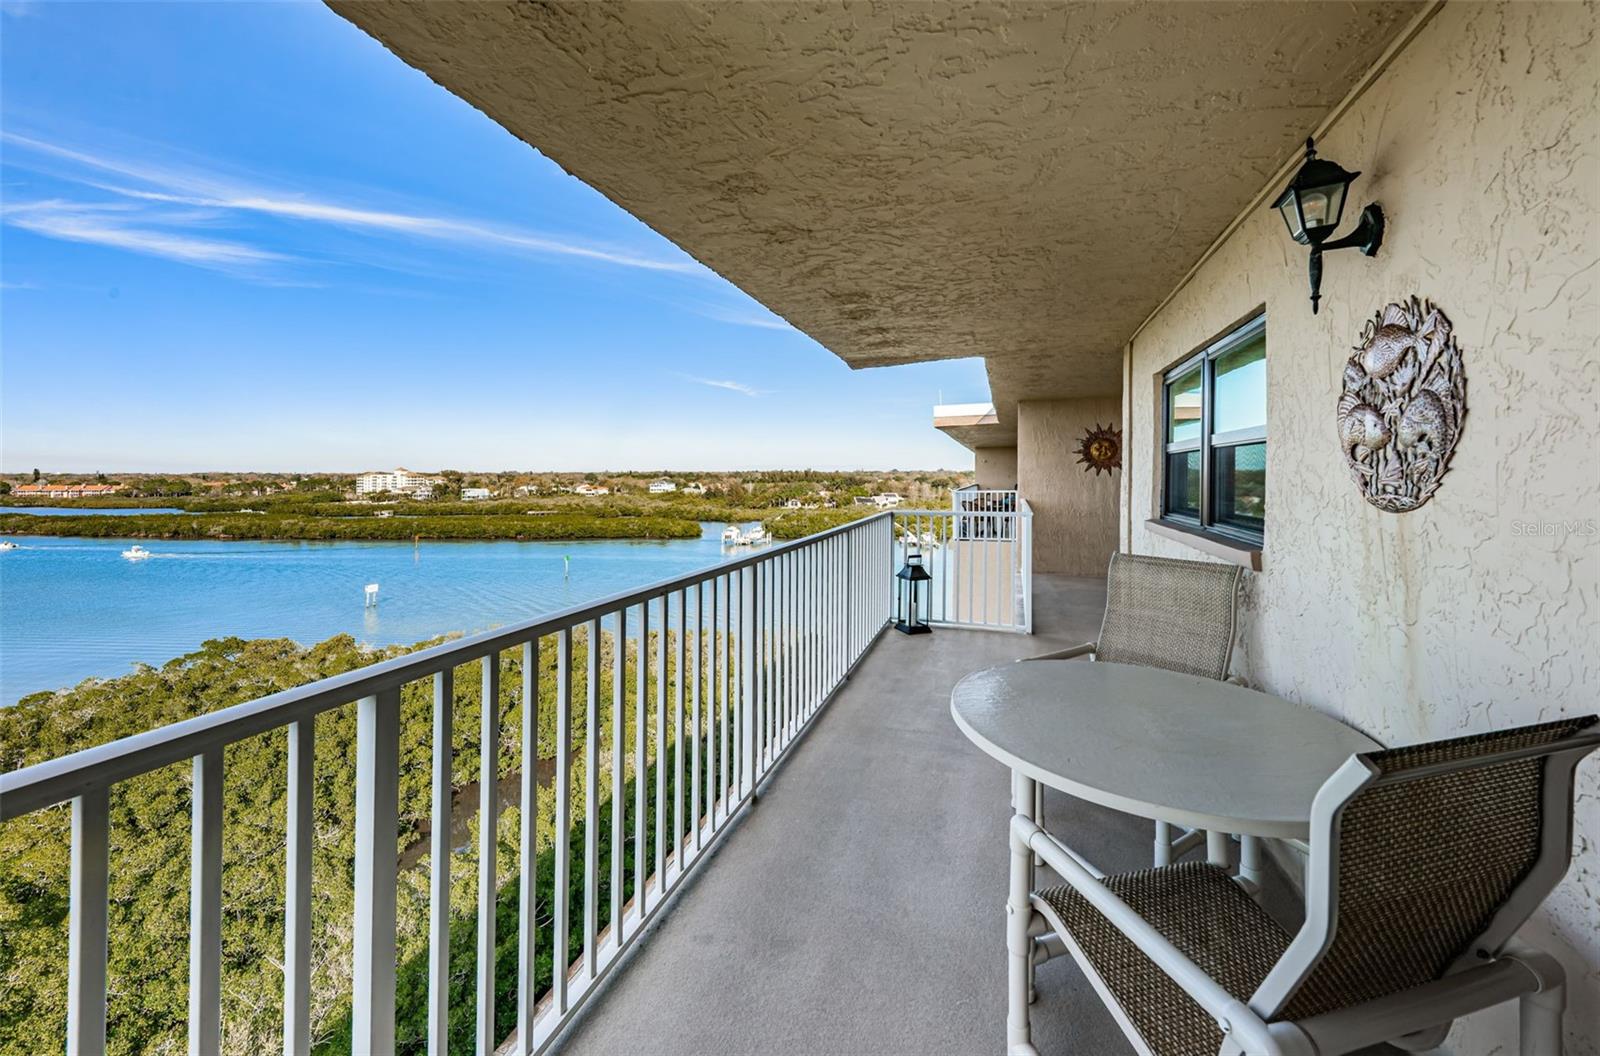 Relax and enjoy the views off your 50 foot balcony!